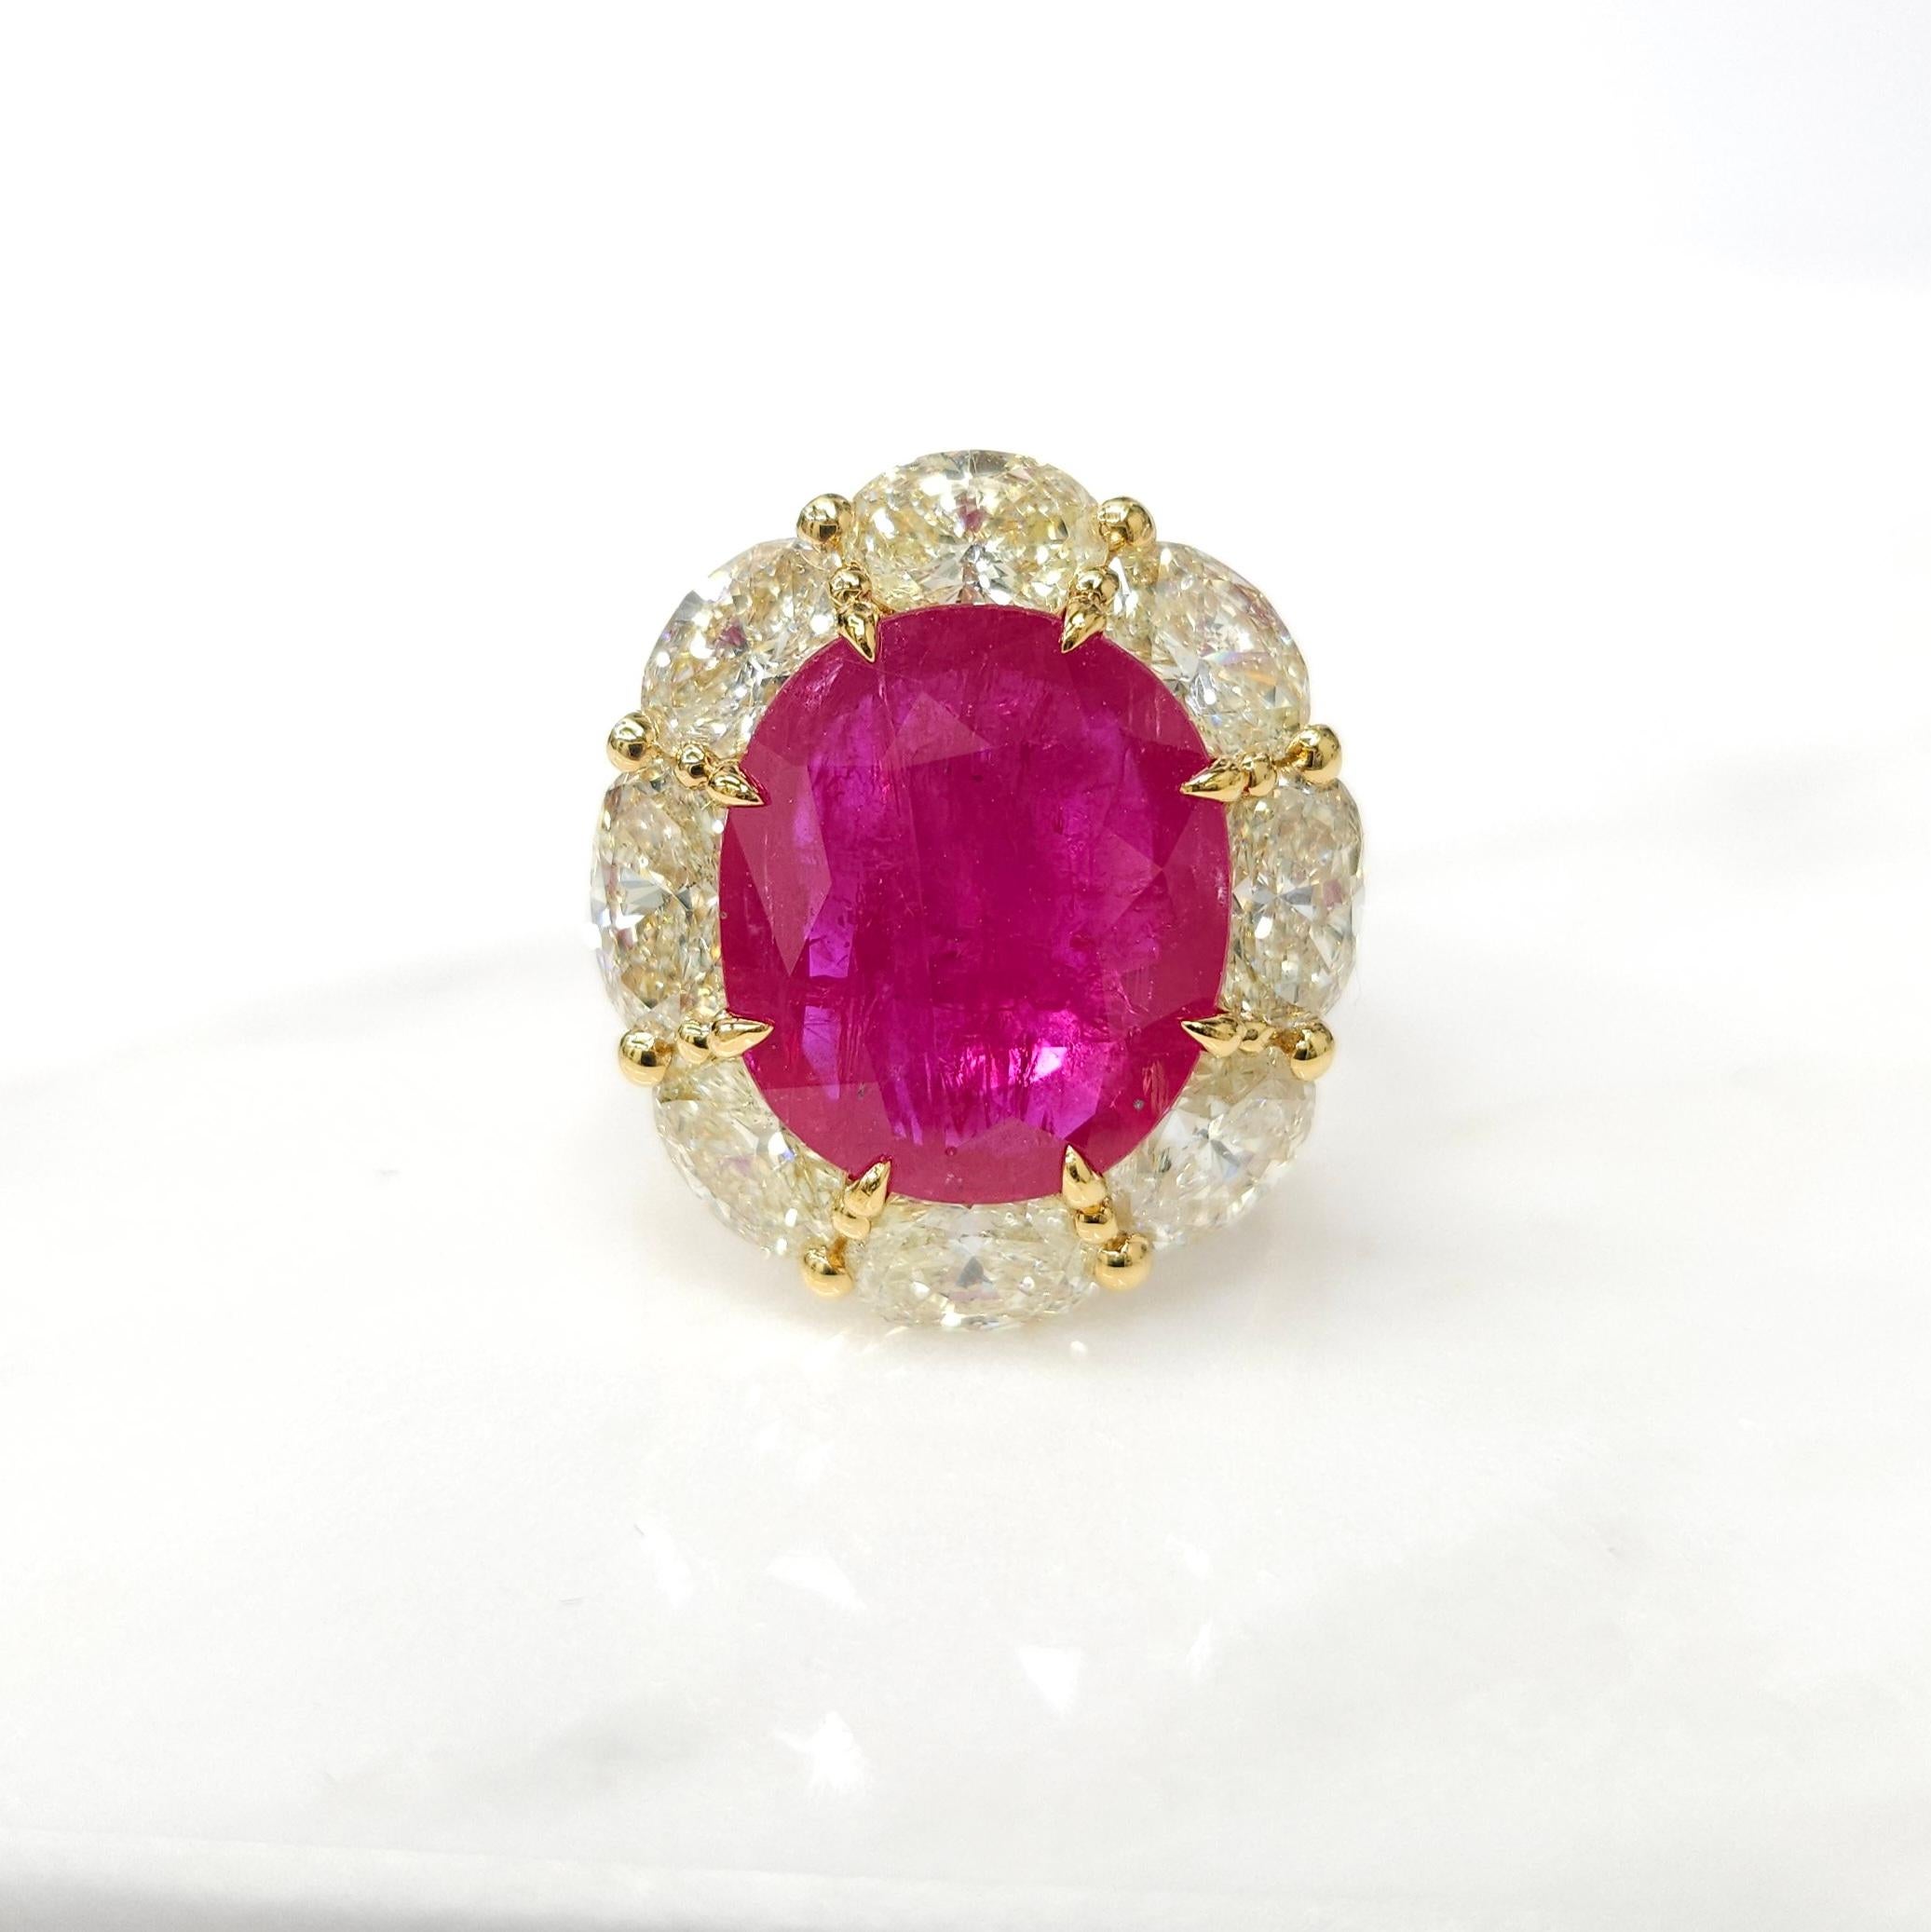 IGI Certified 6.53 Carat Ruby & 3.71 Carat Oval Diamond Ring in 18K Yellow Gold For Sale 4